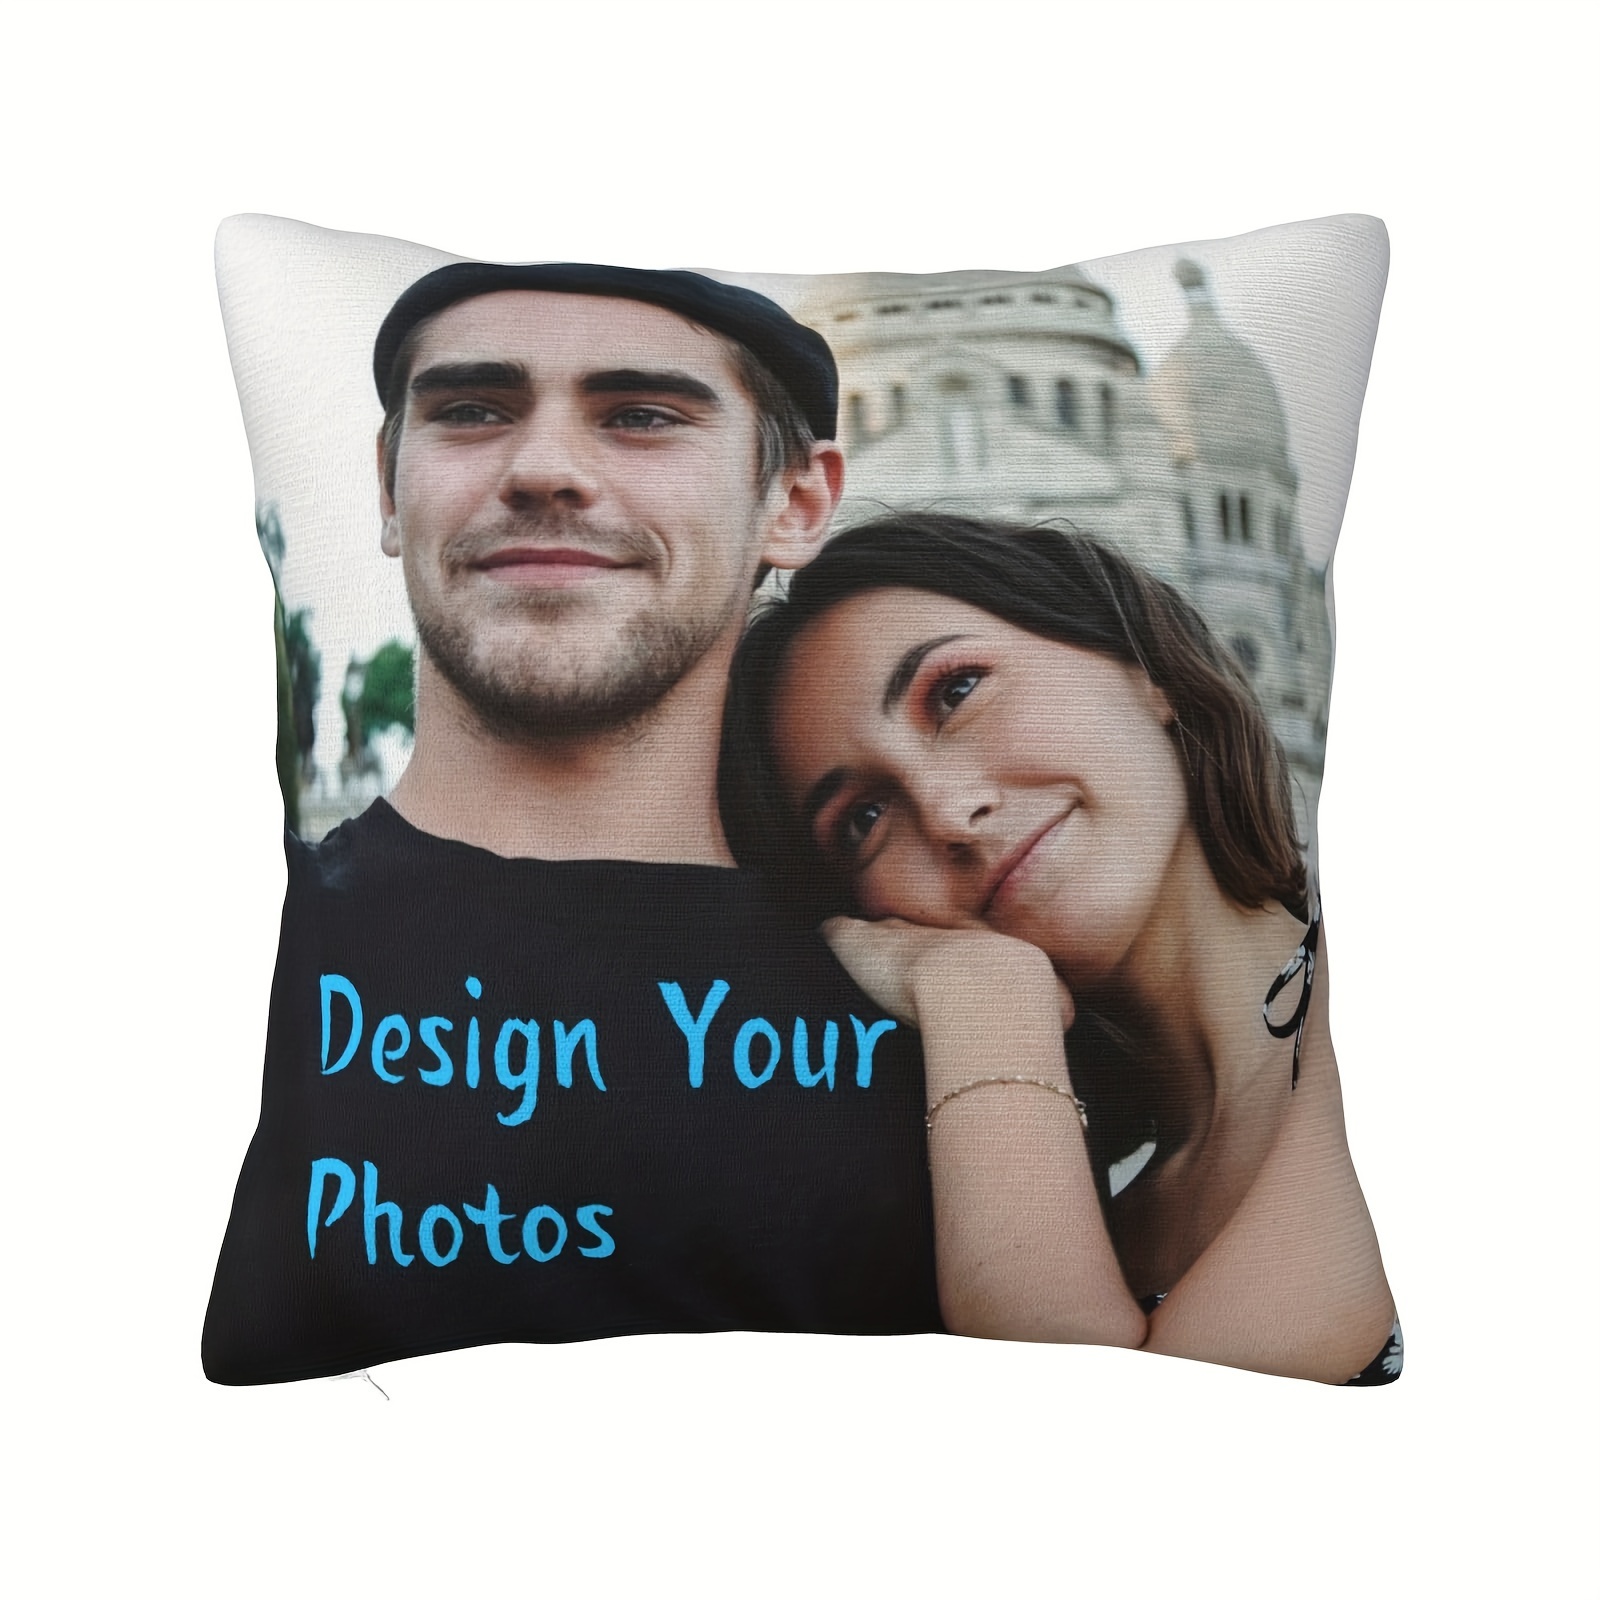 

Custom Pillowcase Cover, Add Your Favorite Pictures, Pet Photos, Landscape Photos, Wedding Love Household Items, Single-sided Design Personalized Pillowcase, Christmas, Halloween, Birthday Custom Gift